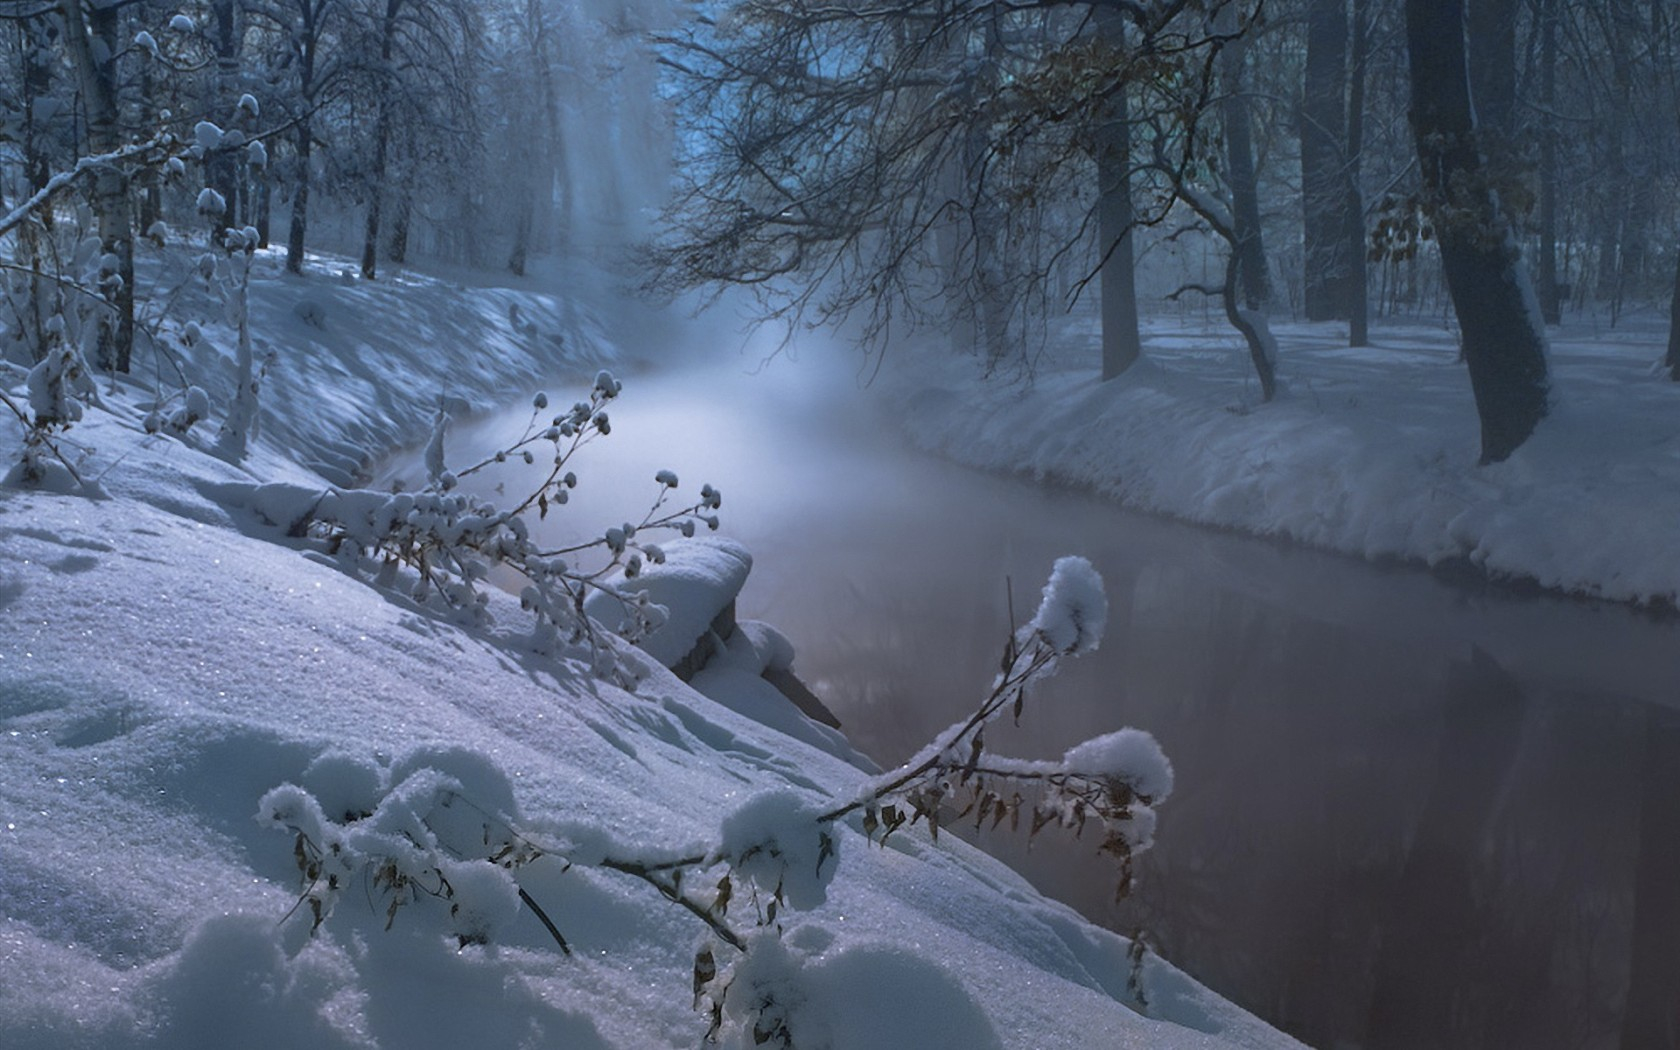 Foggy Winter Night On River 1680×1050 Wide Wallpaper.net. Journeying To The Goddess